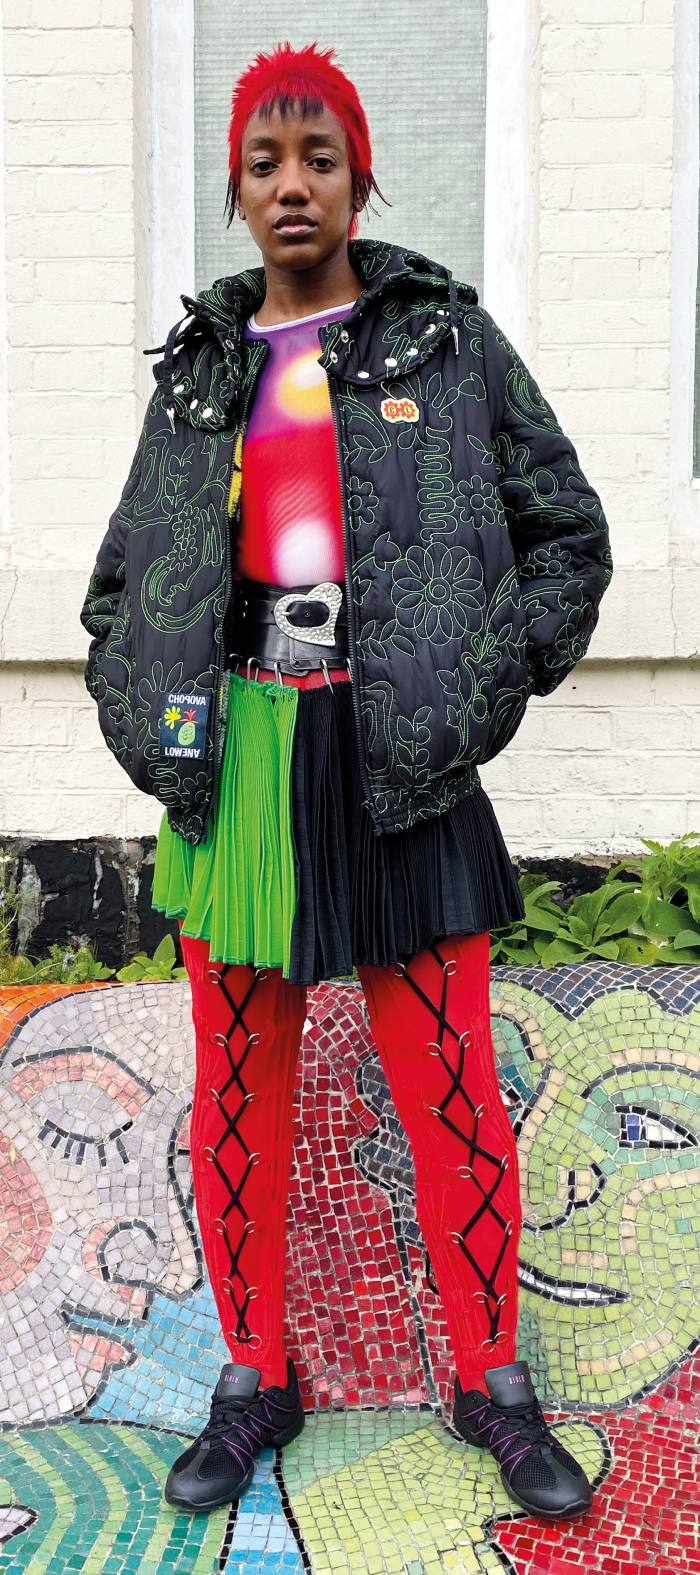 A model wears a dark jacket and black-and-green skirt over a red top and red tights